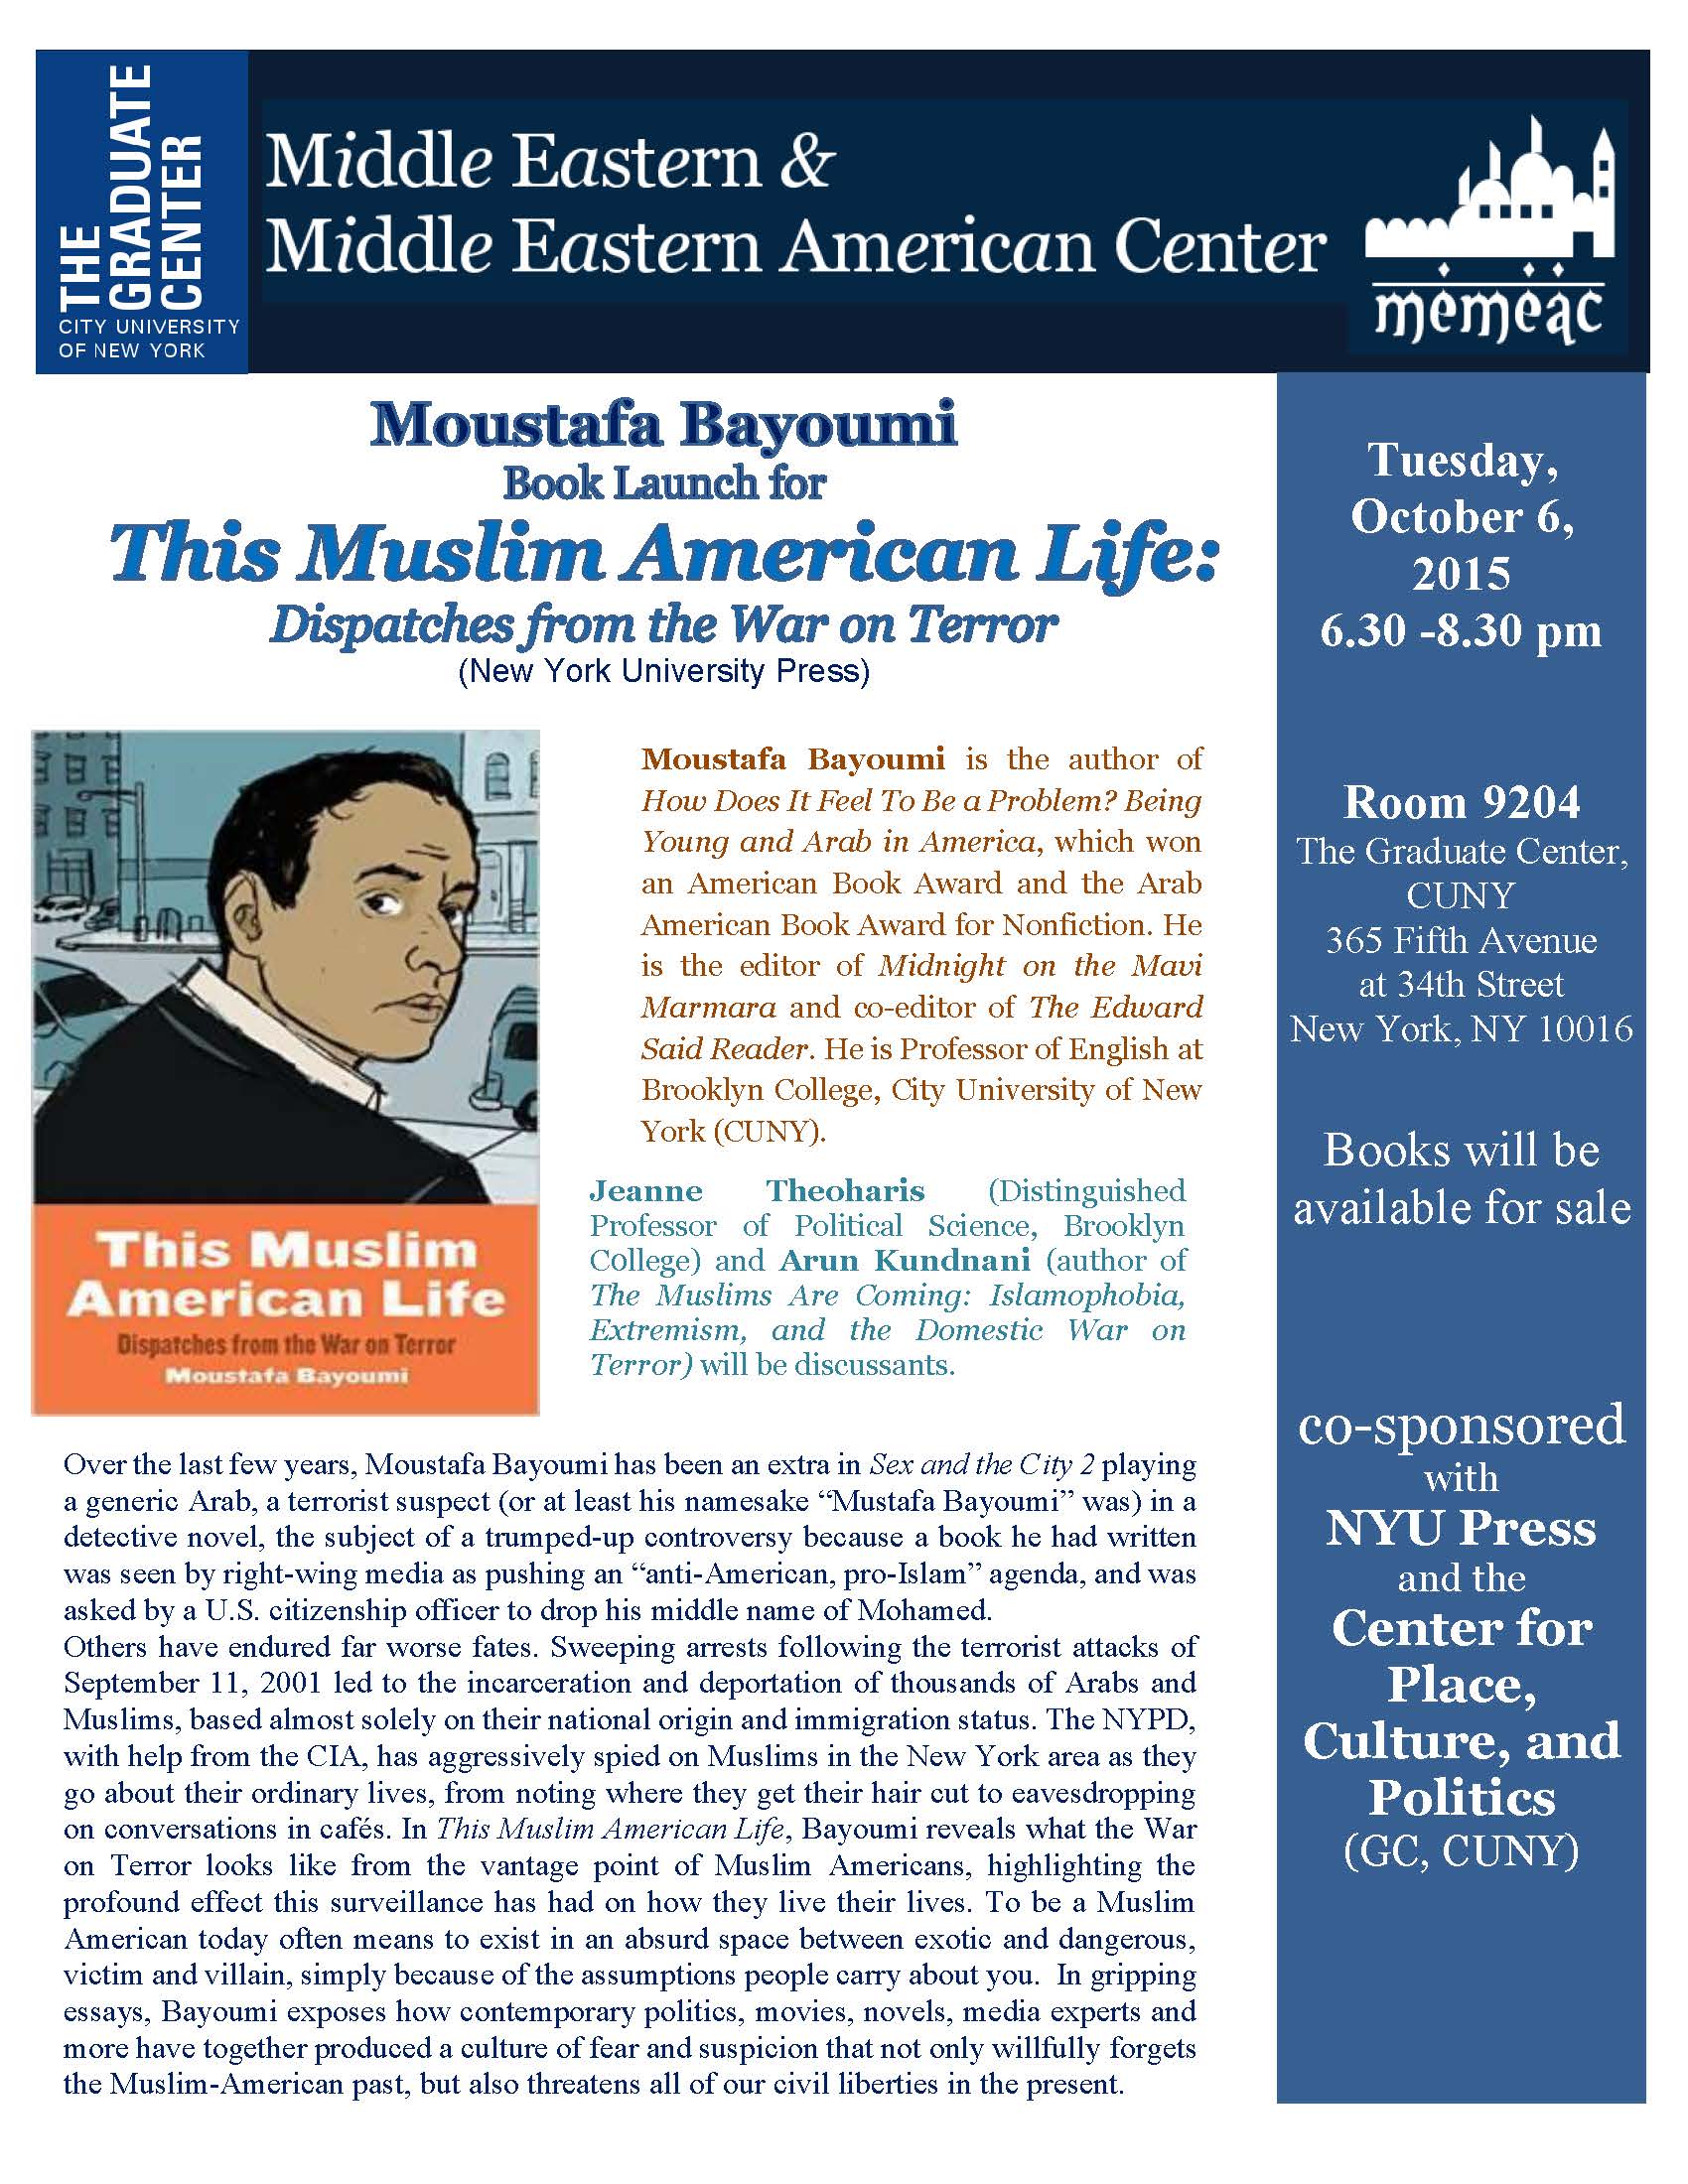 10/6 BOOK PARTY: This Muslim American Life